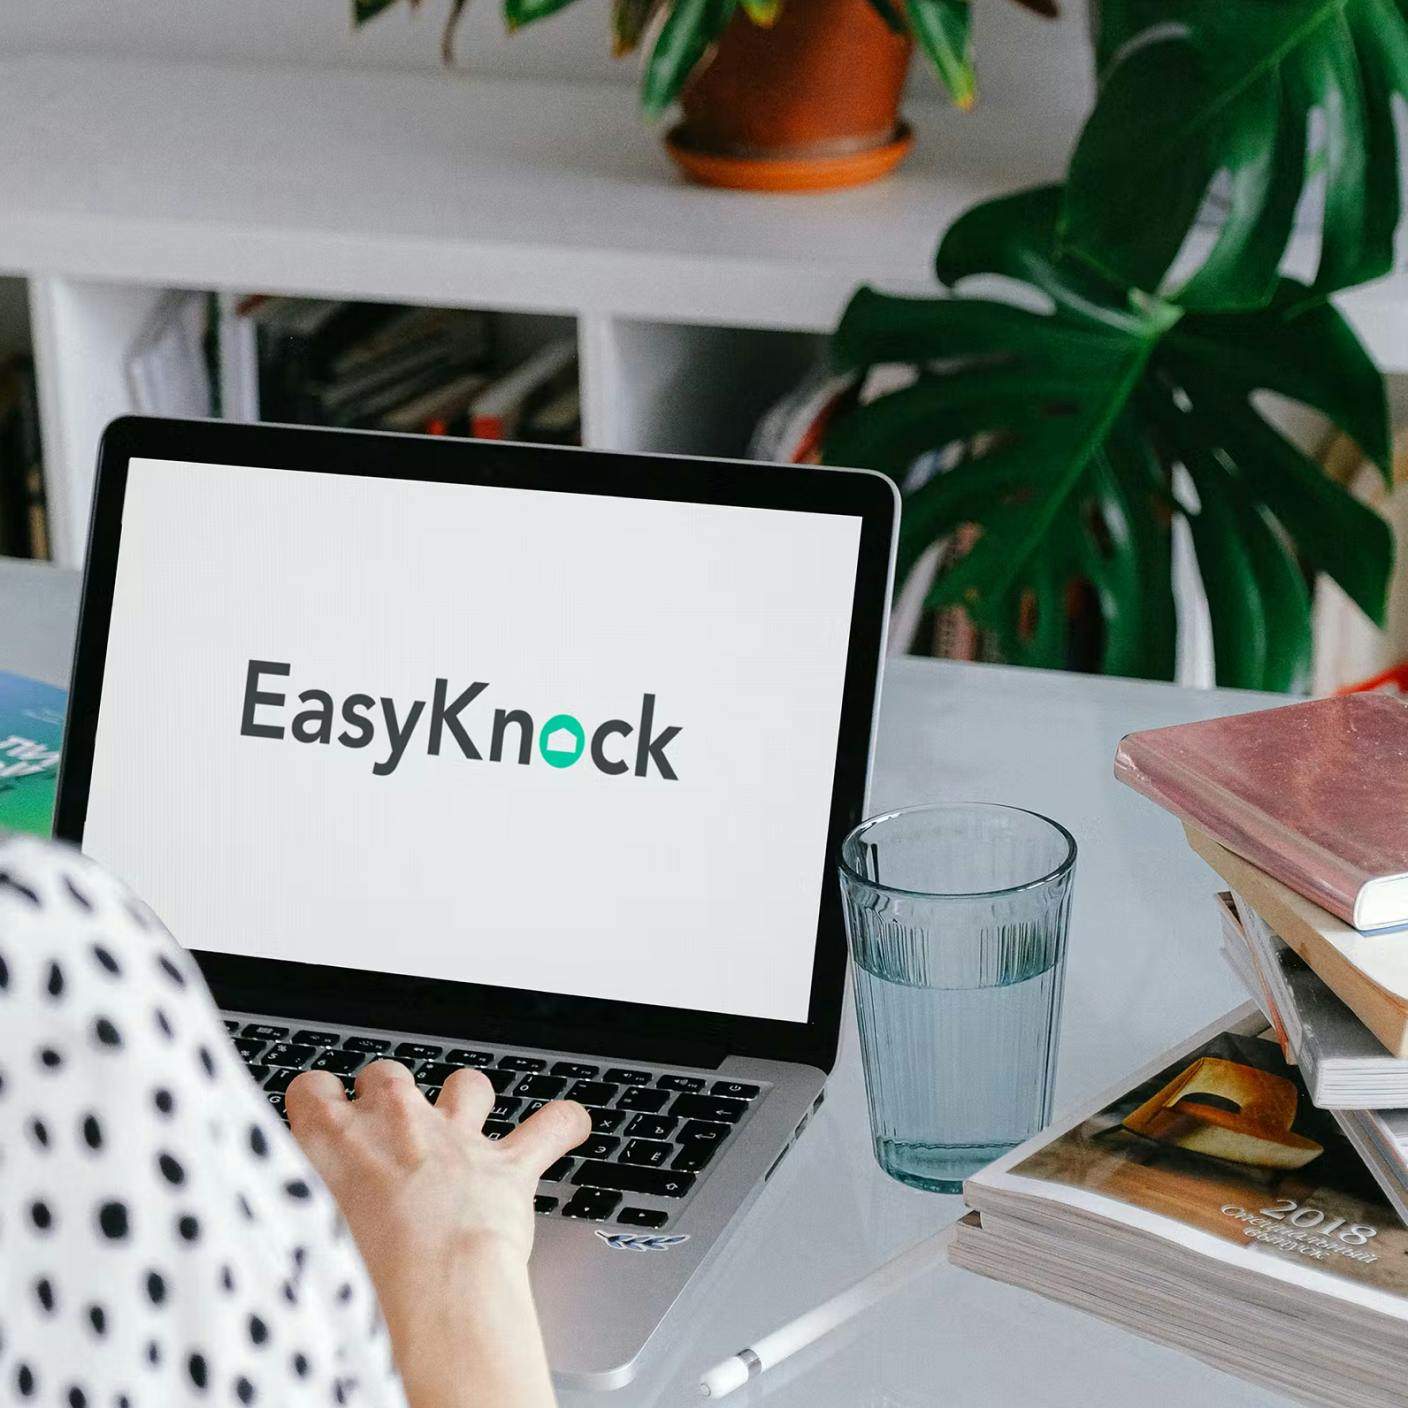 Our+Story At+EasyKnock